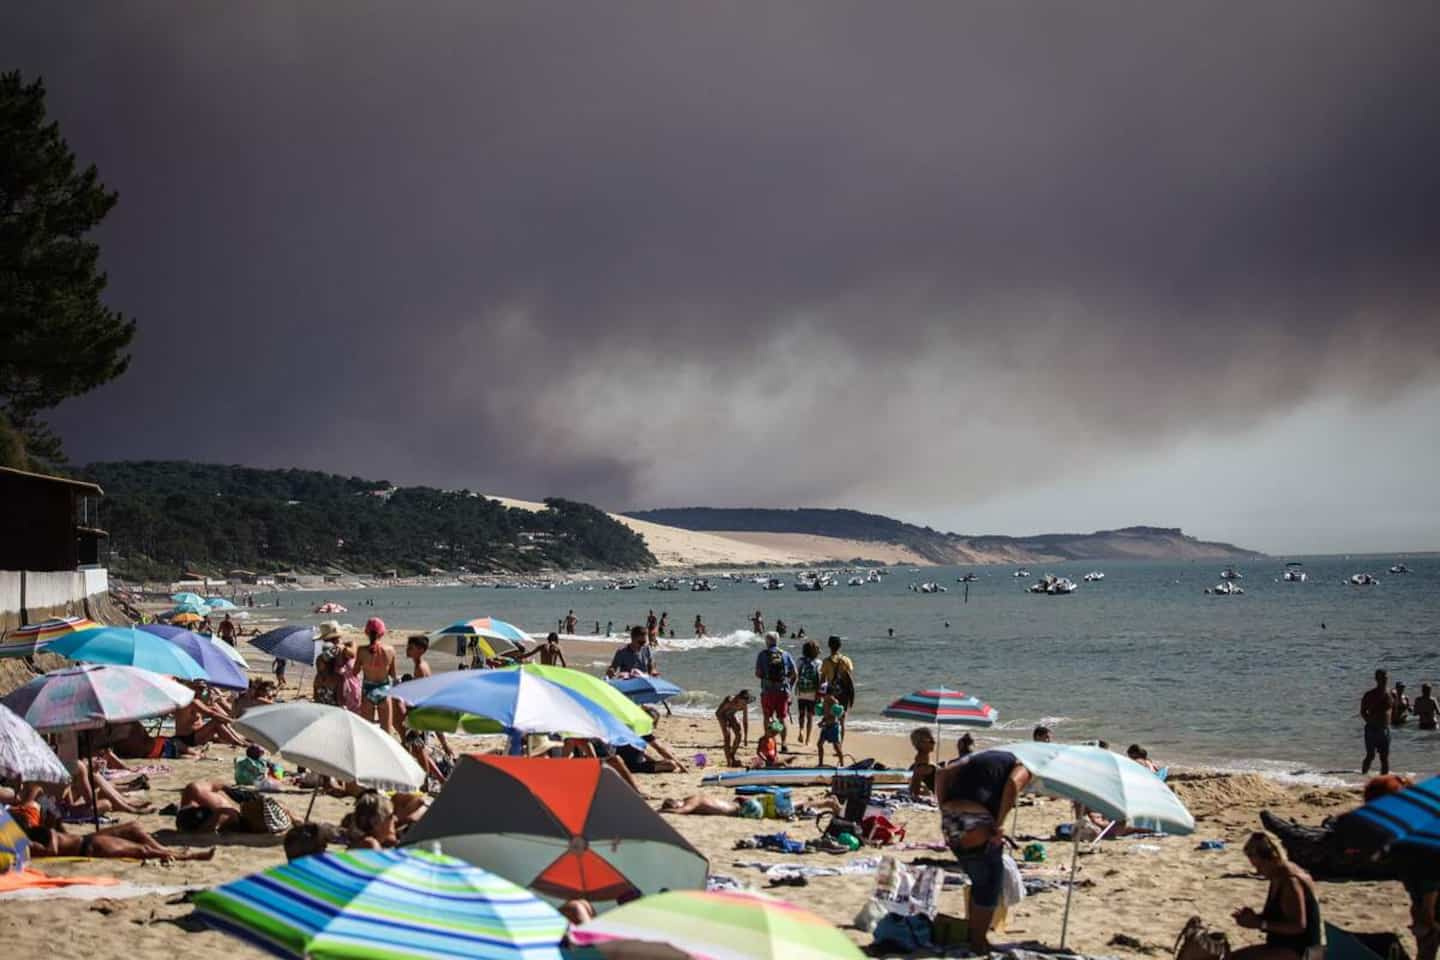 Southern Europe plagued by fires